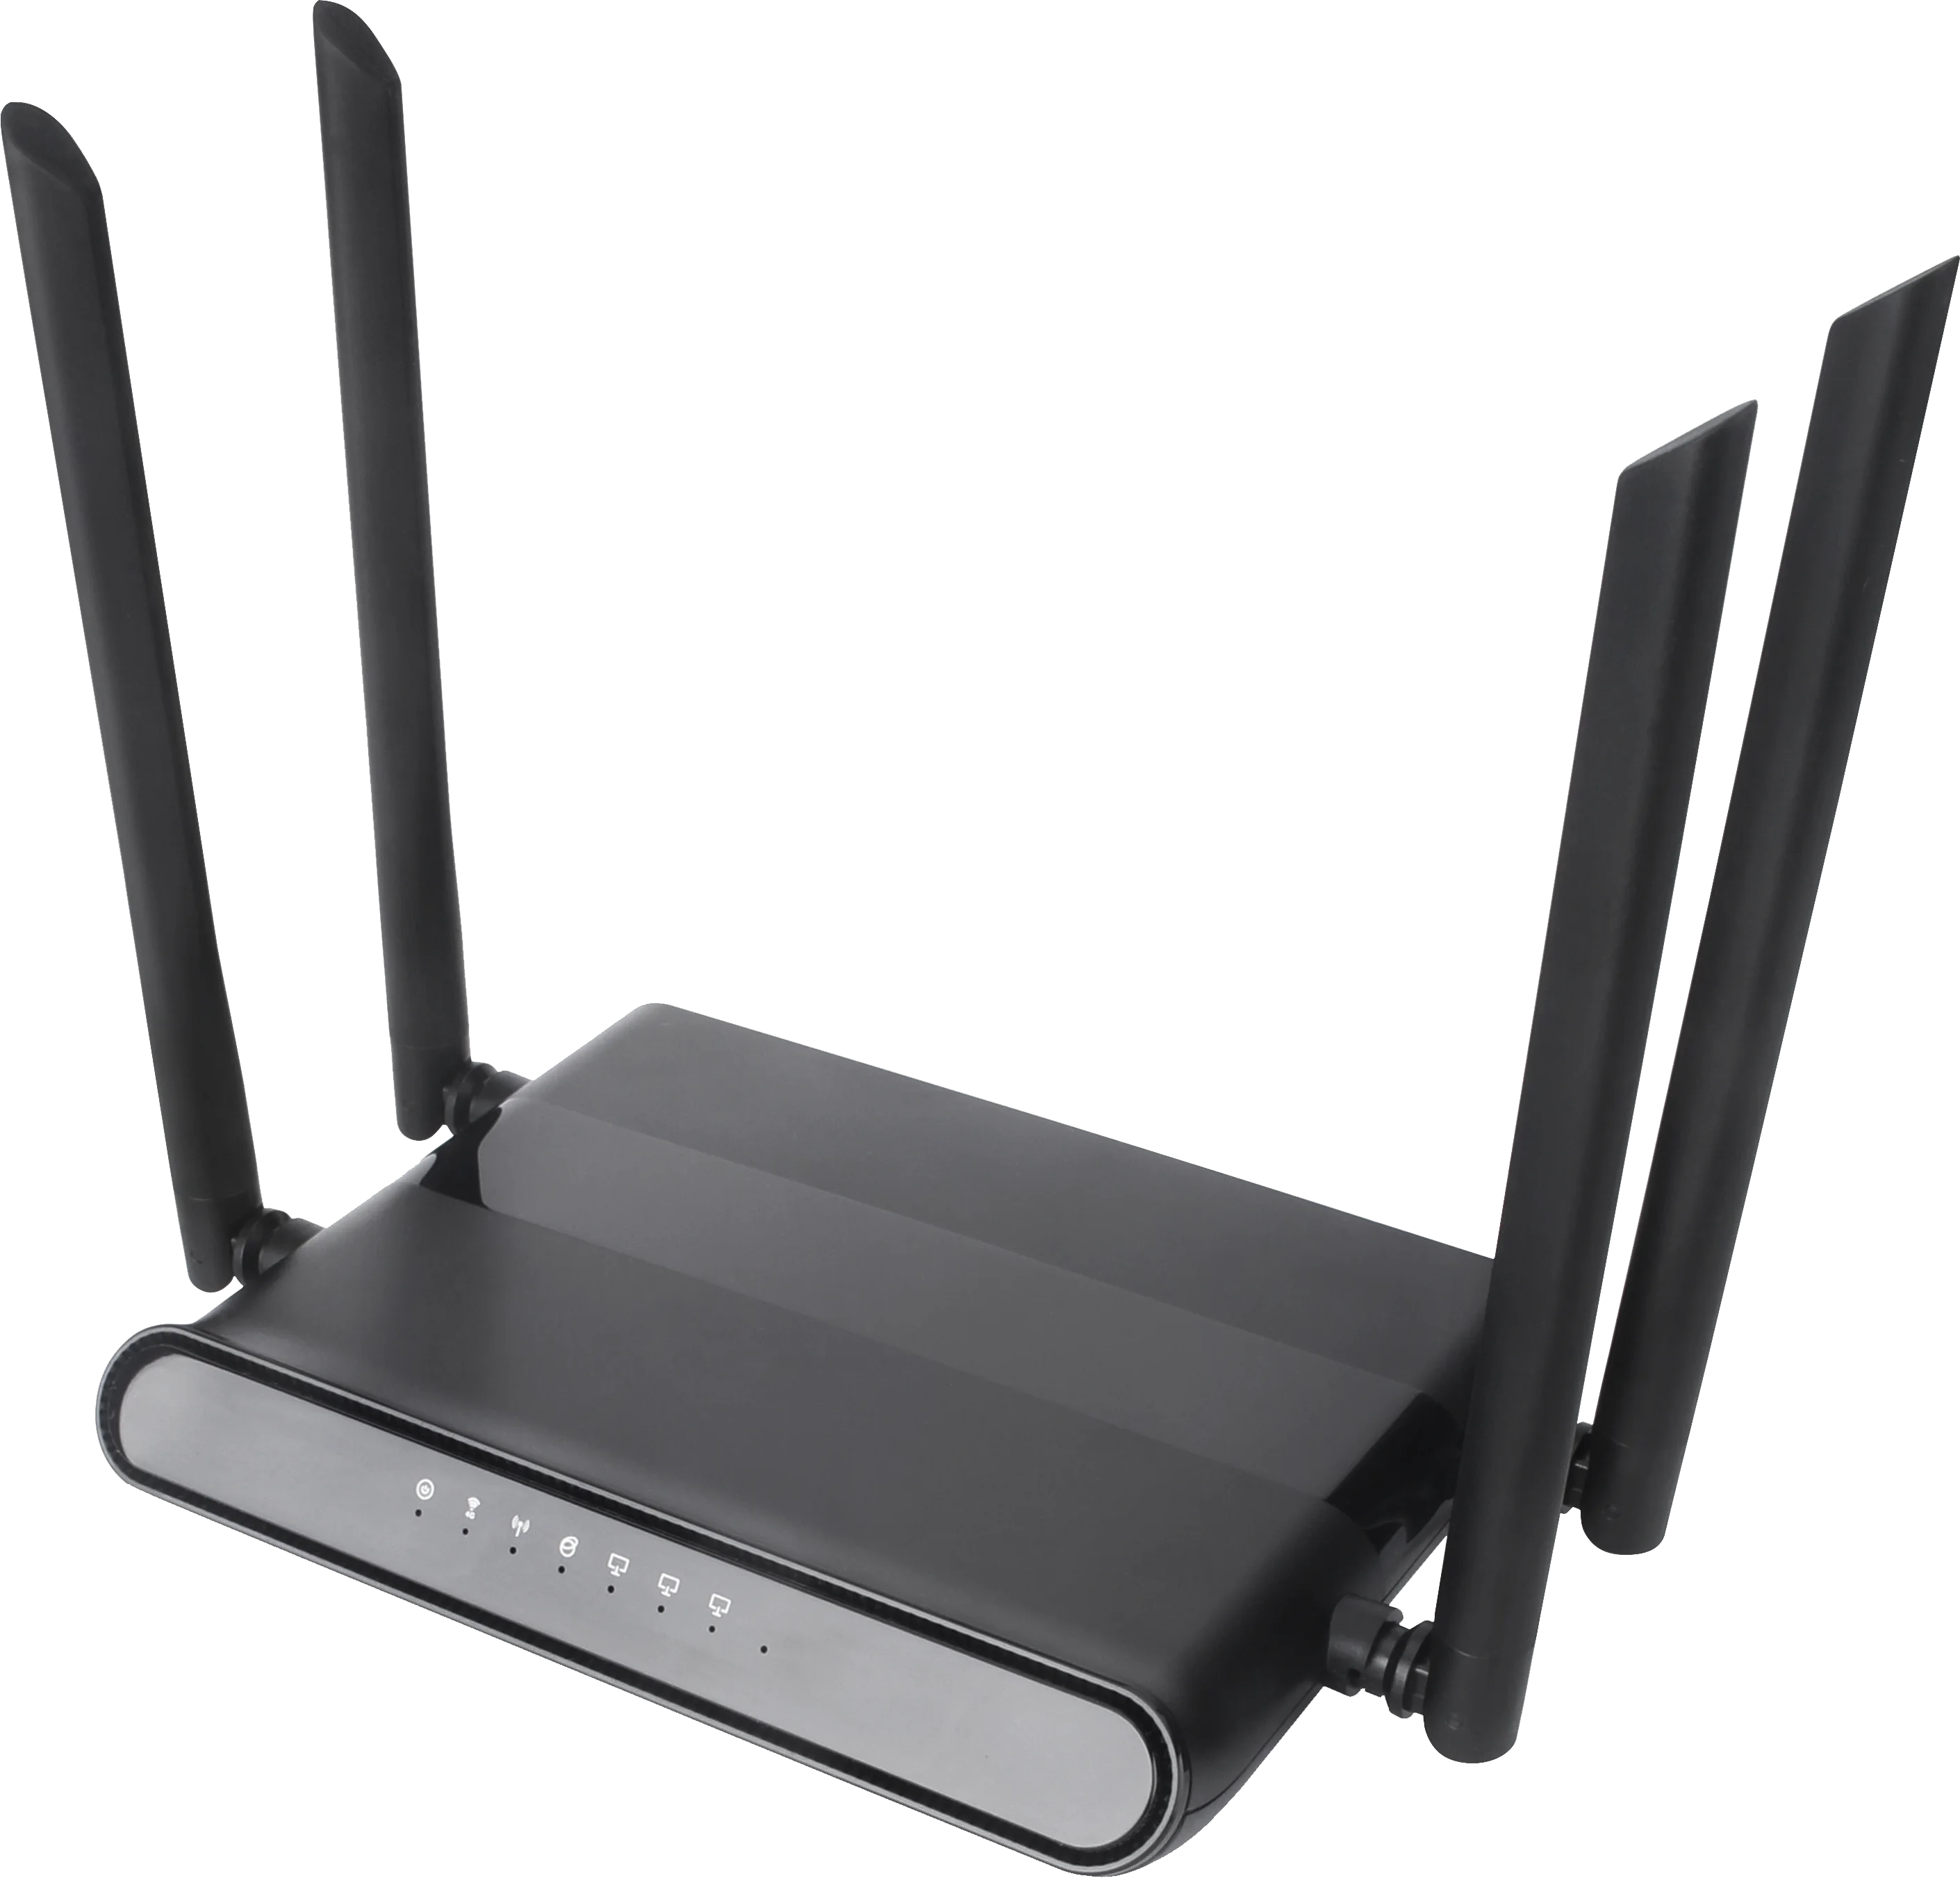 Wiflyer WE5925-E 3G 4G WiFi Router 300mbps 4 High Gain Antennas Wide Coverage Home Router Stable WiFi Signal Network Extender